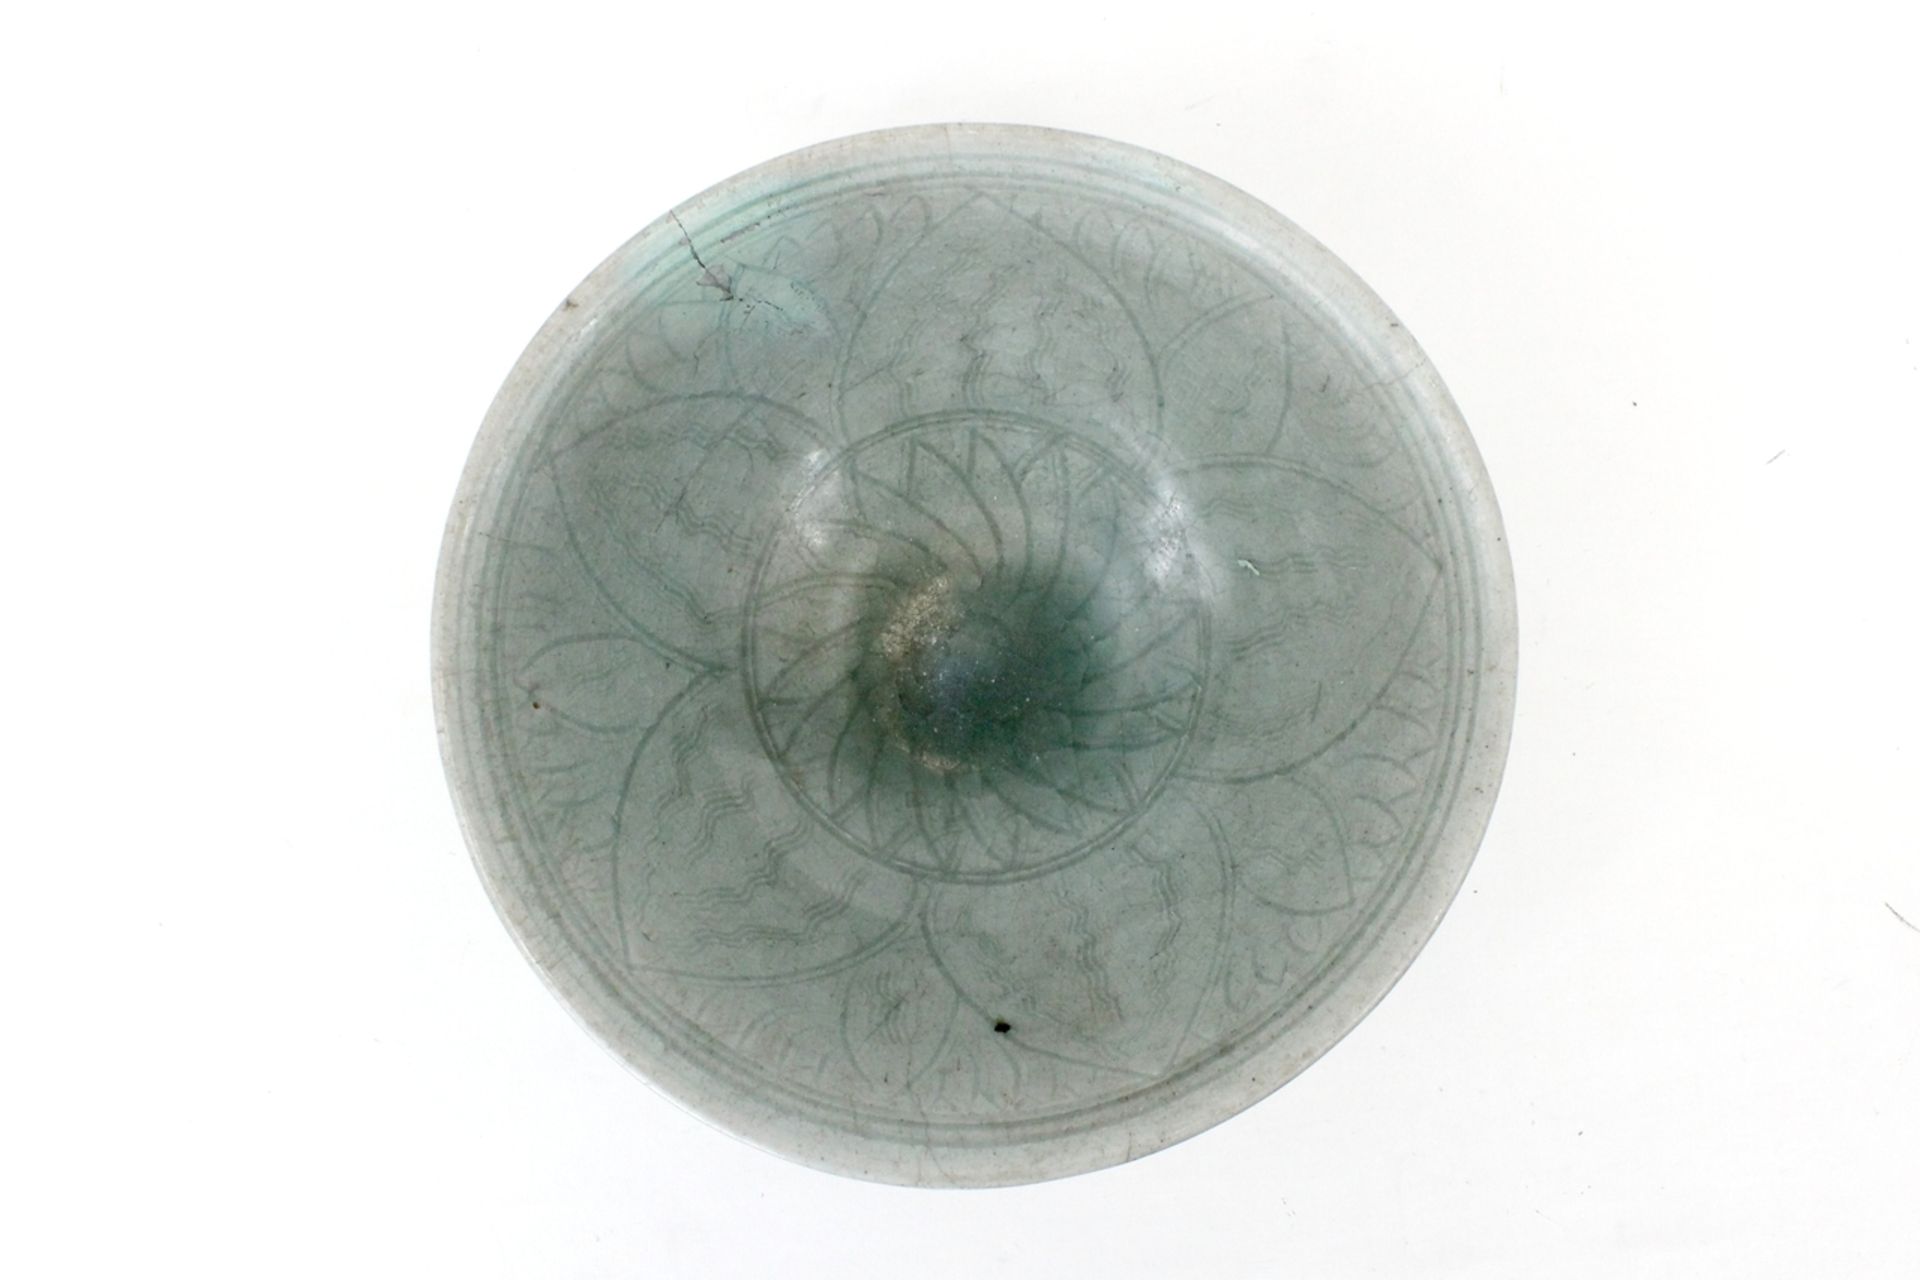 China Celadon Schale Ming Dynastie - Image 2 of 4